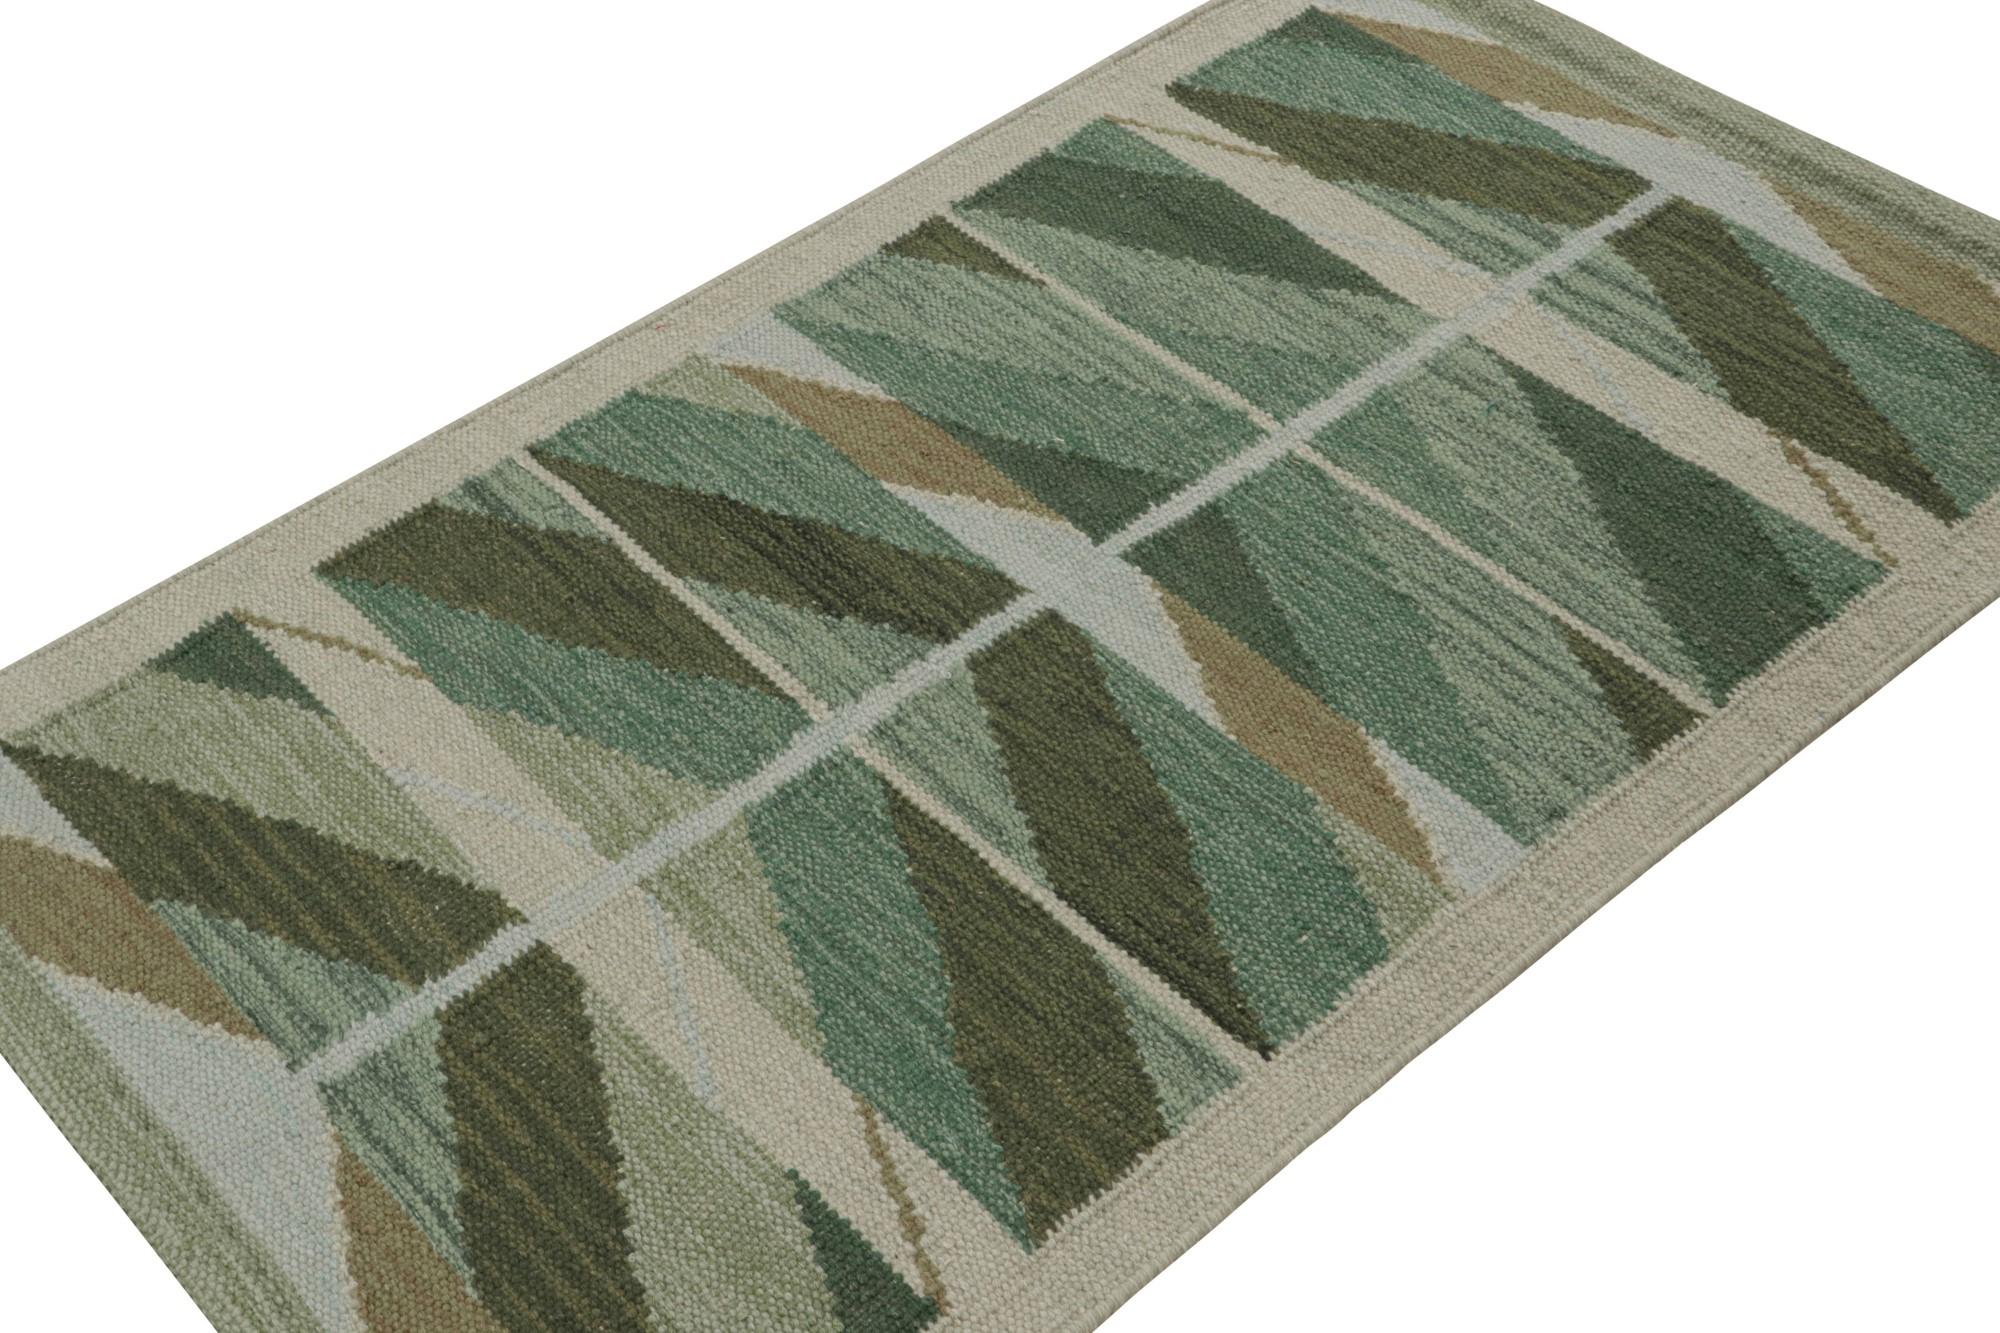 A smart 3x5 Swedish style kilim from our award-winning Scandinavian flat weave collection. Handwoven in wool, cotton & undyed natural yarns.

On the Design: 

This scatter rug enjoys geometric patterns in tones of green & white. Keen eyes will